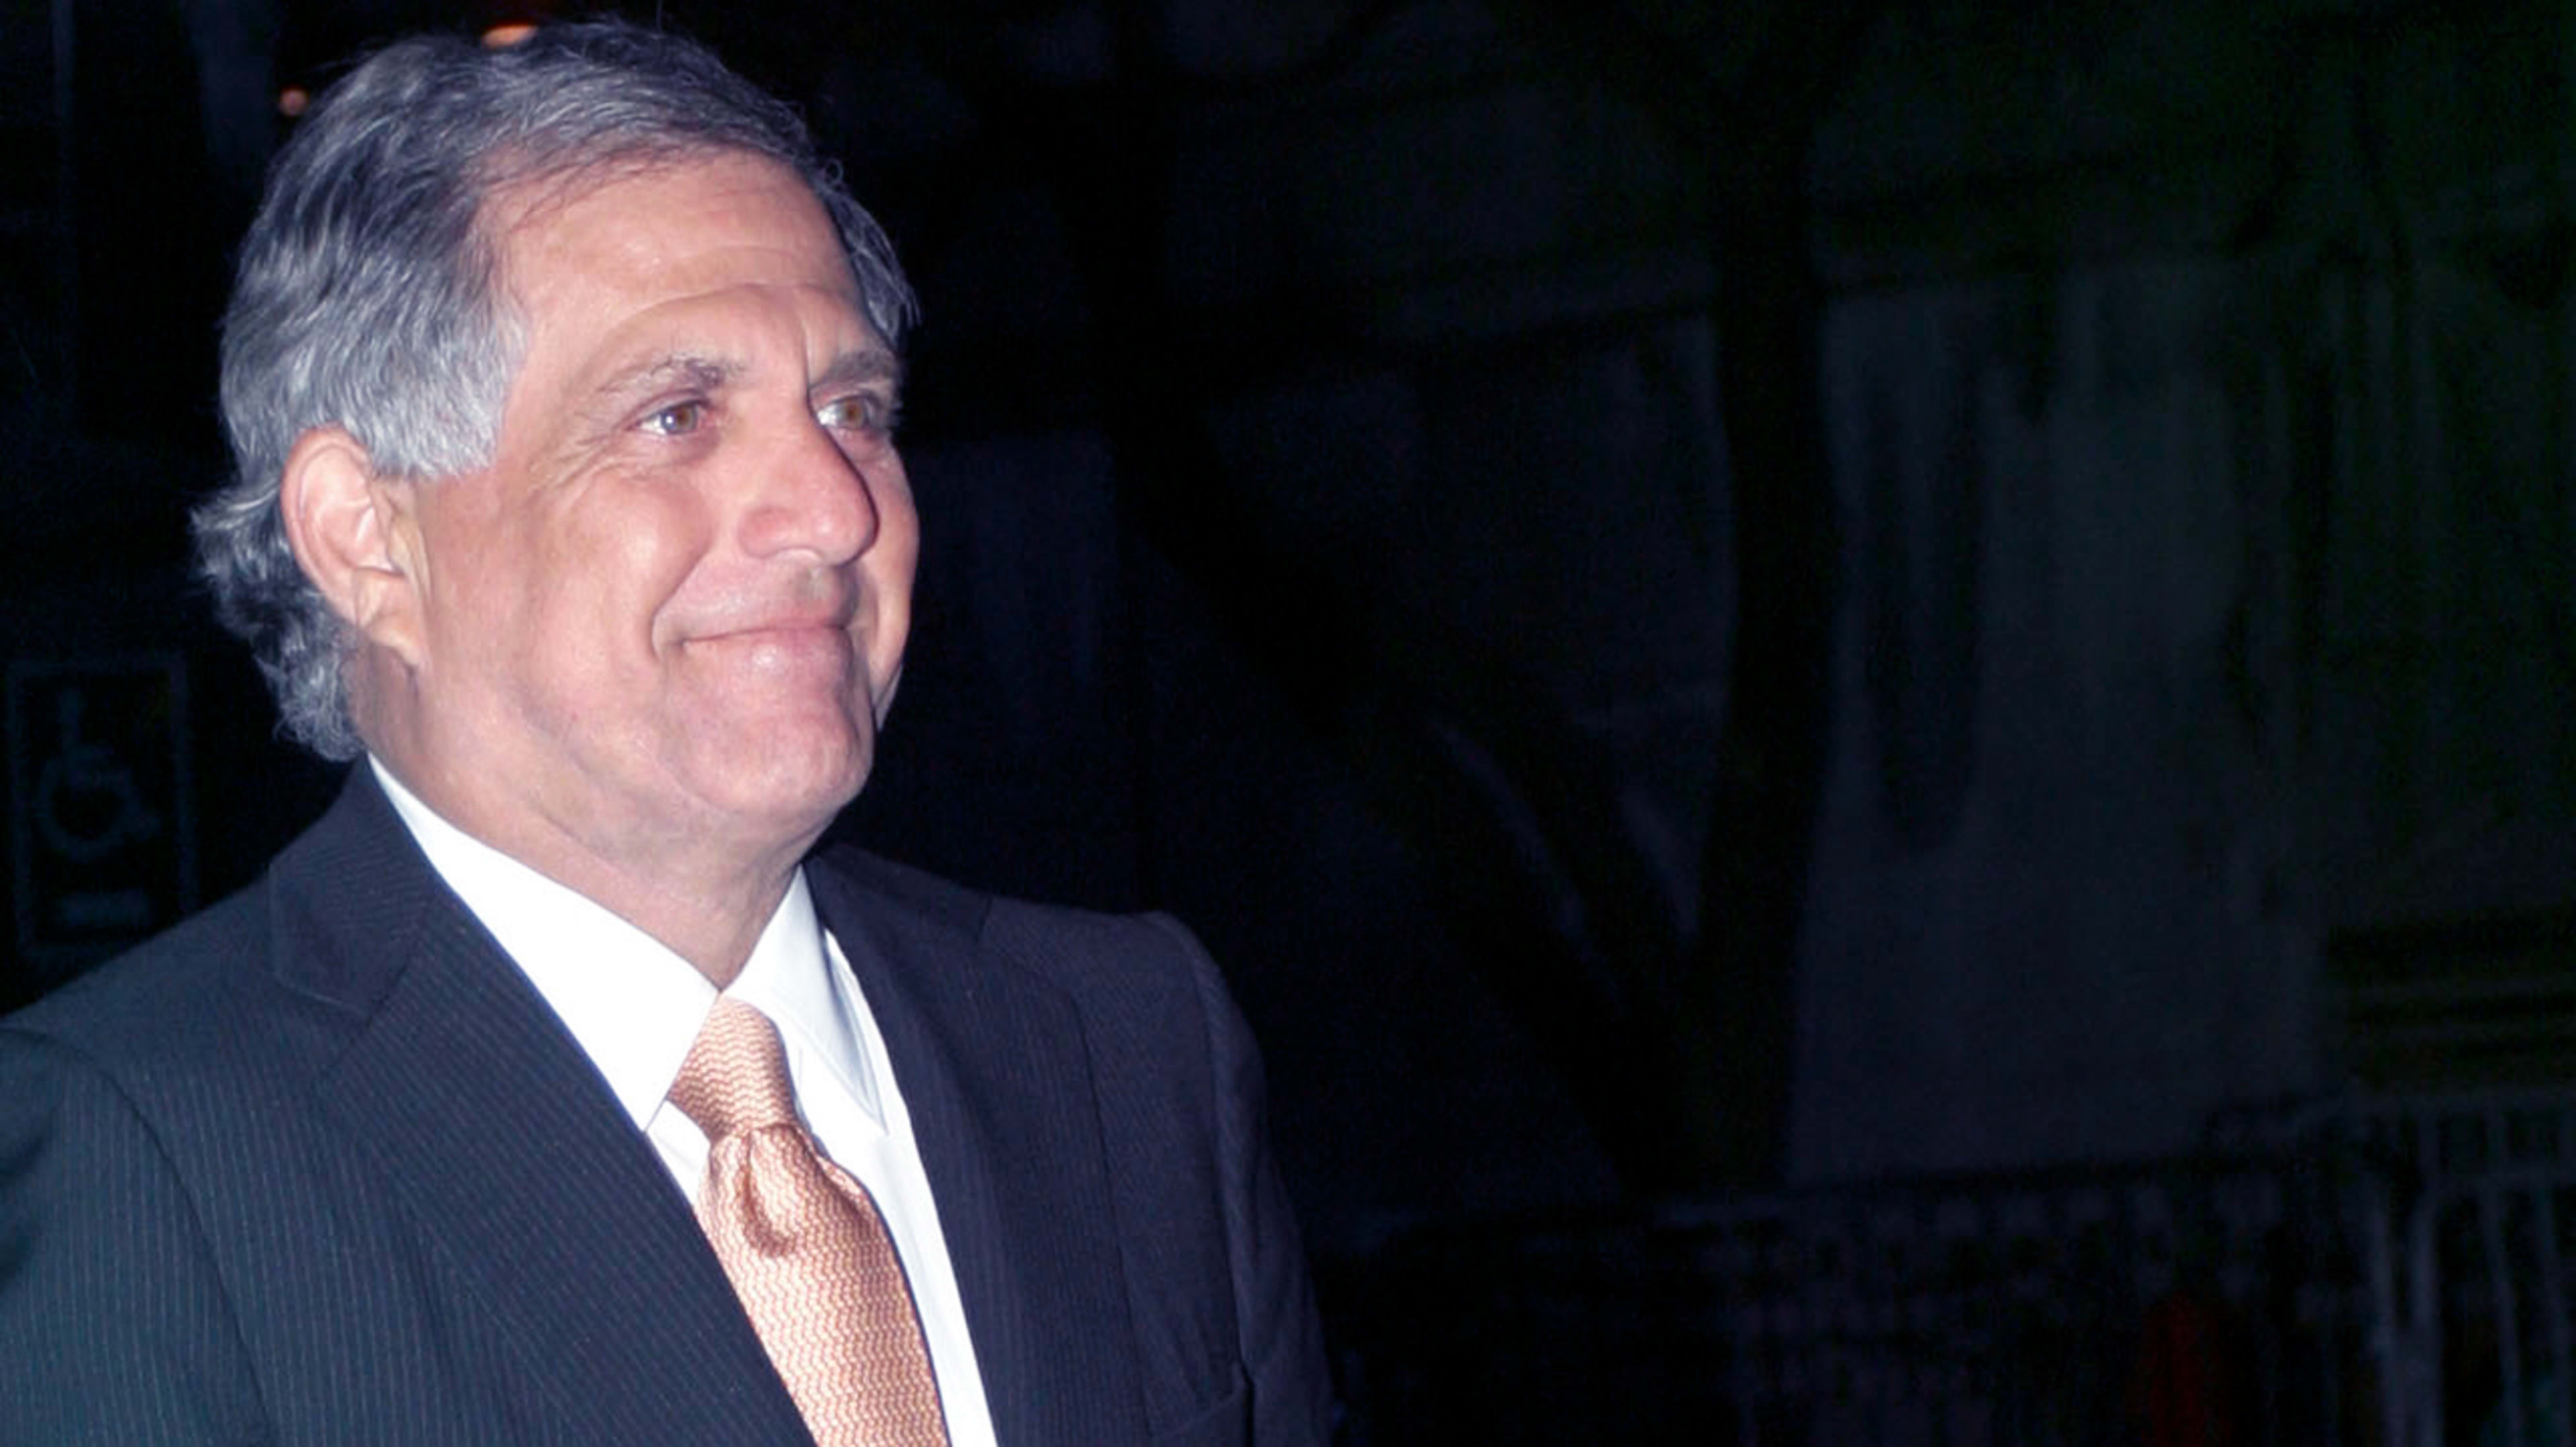 Les Moonves resigns from CBS following sexual harassment claims